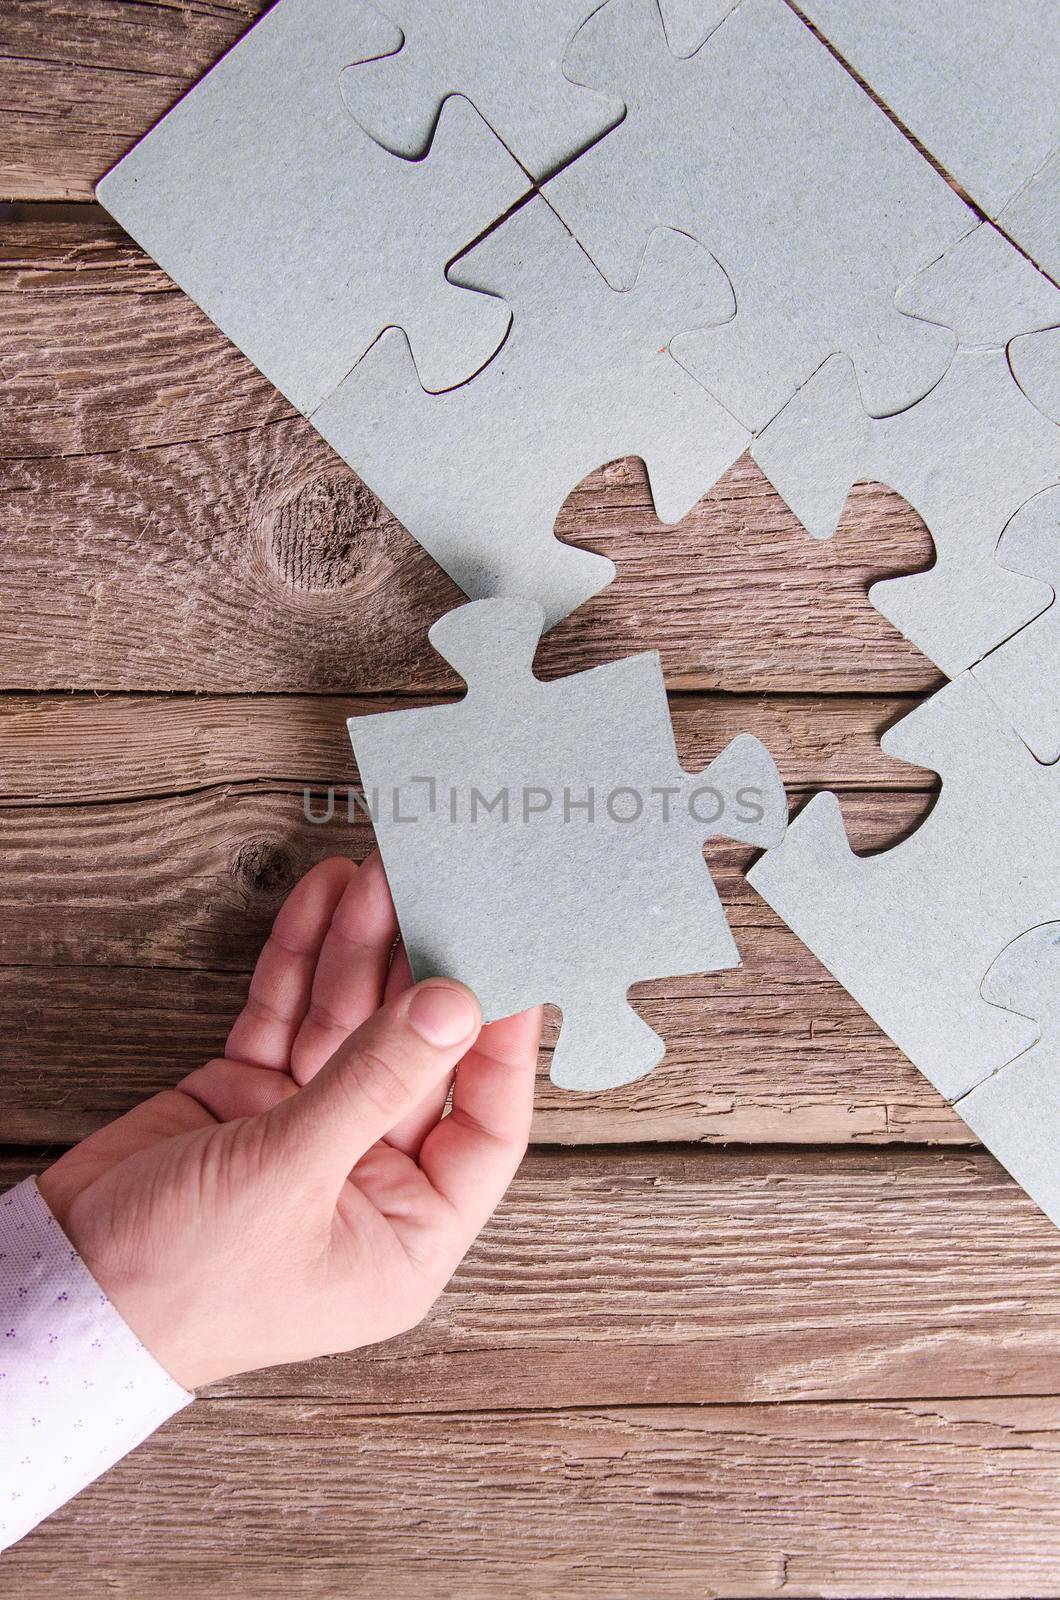 Incomplete puzzles lying on wooden rustic boards. by Jyliana